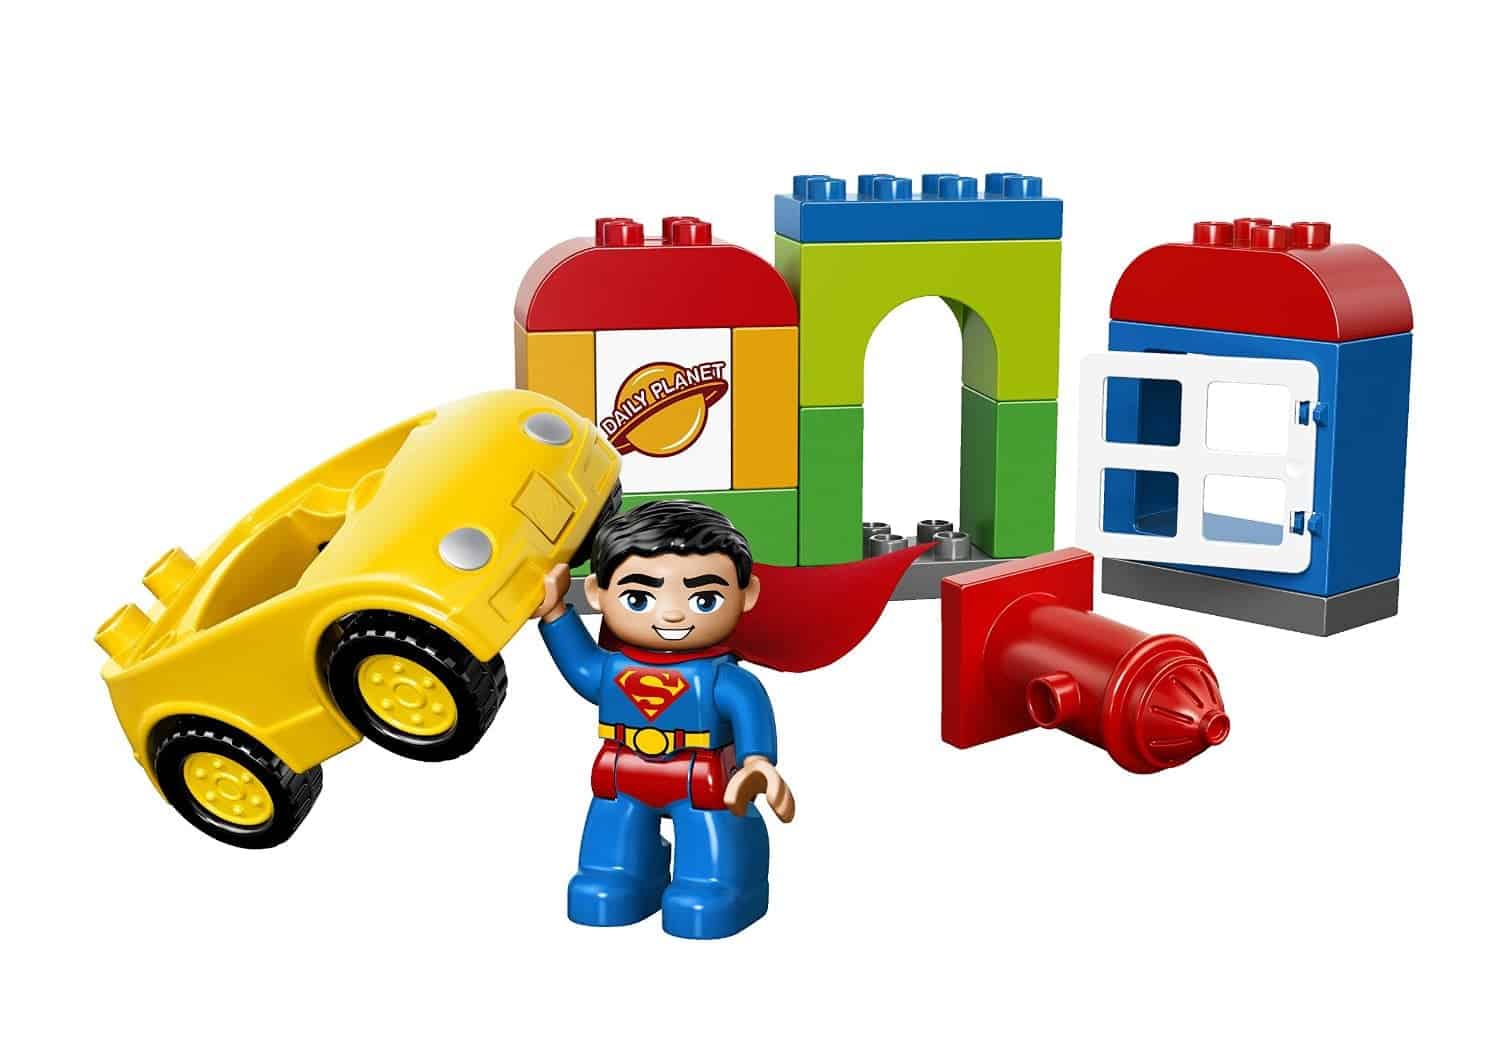 Lego Gift Ideas by Age - Toddler to Twelve Years: Superman Building Set | www.thepinningmama.com